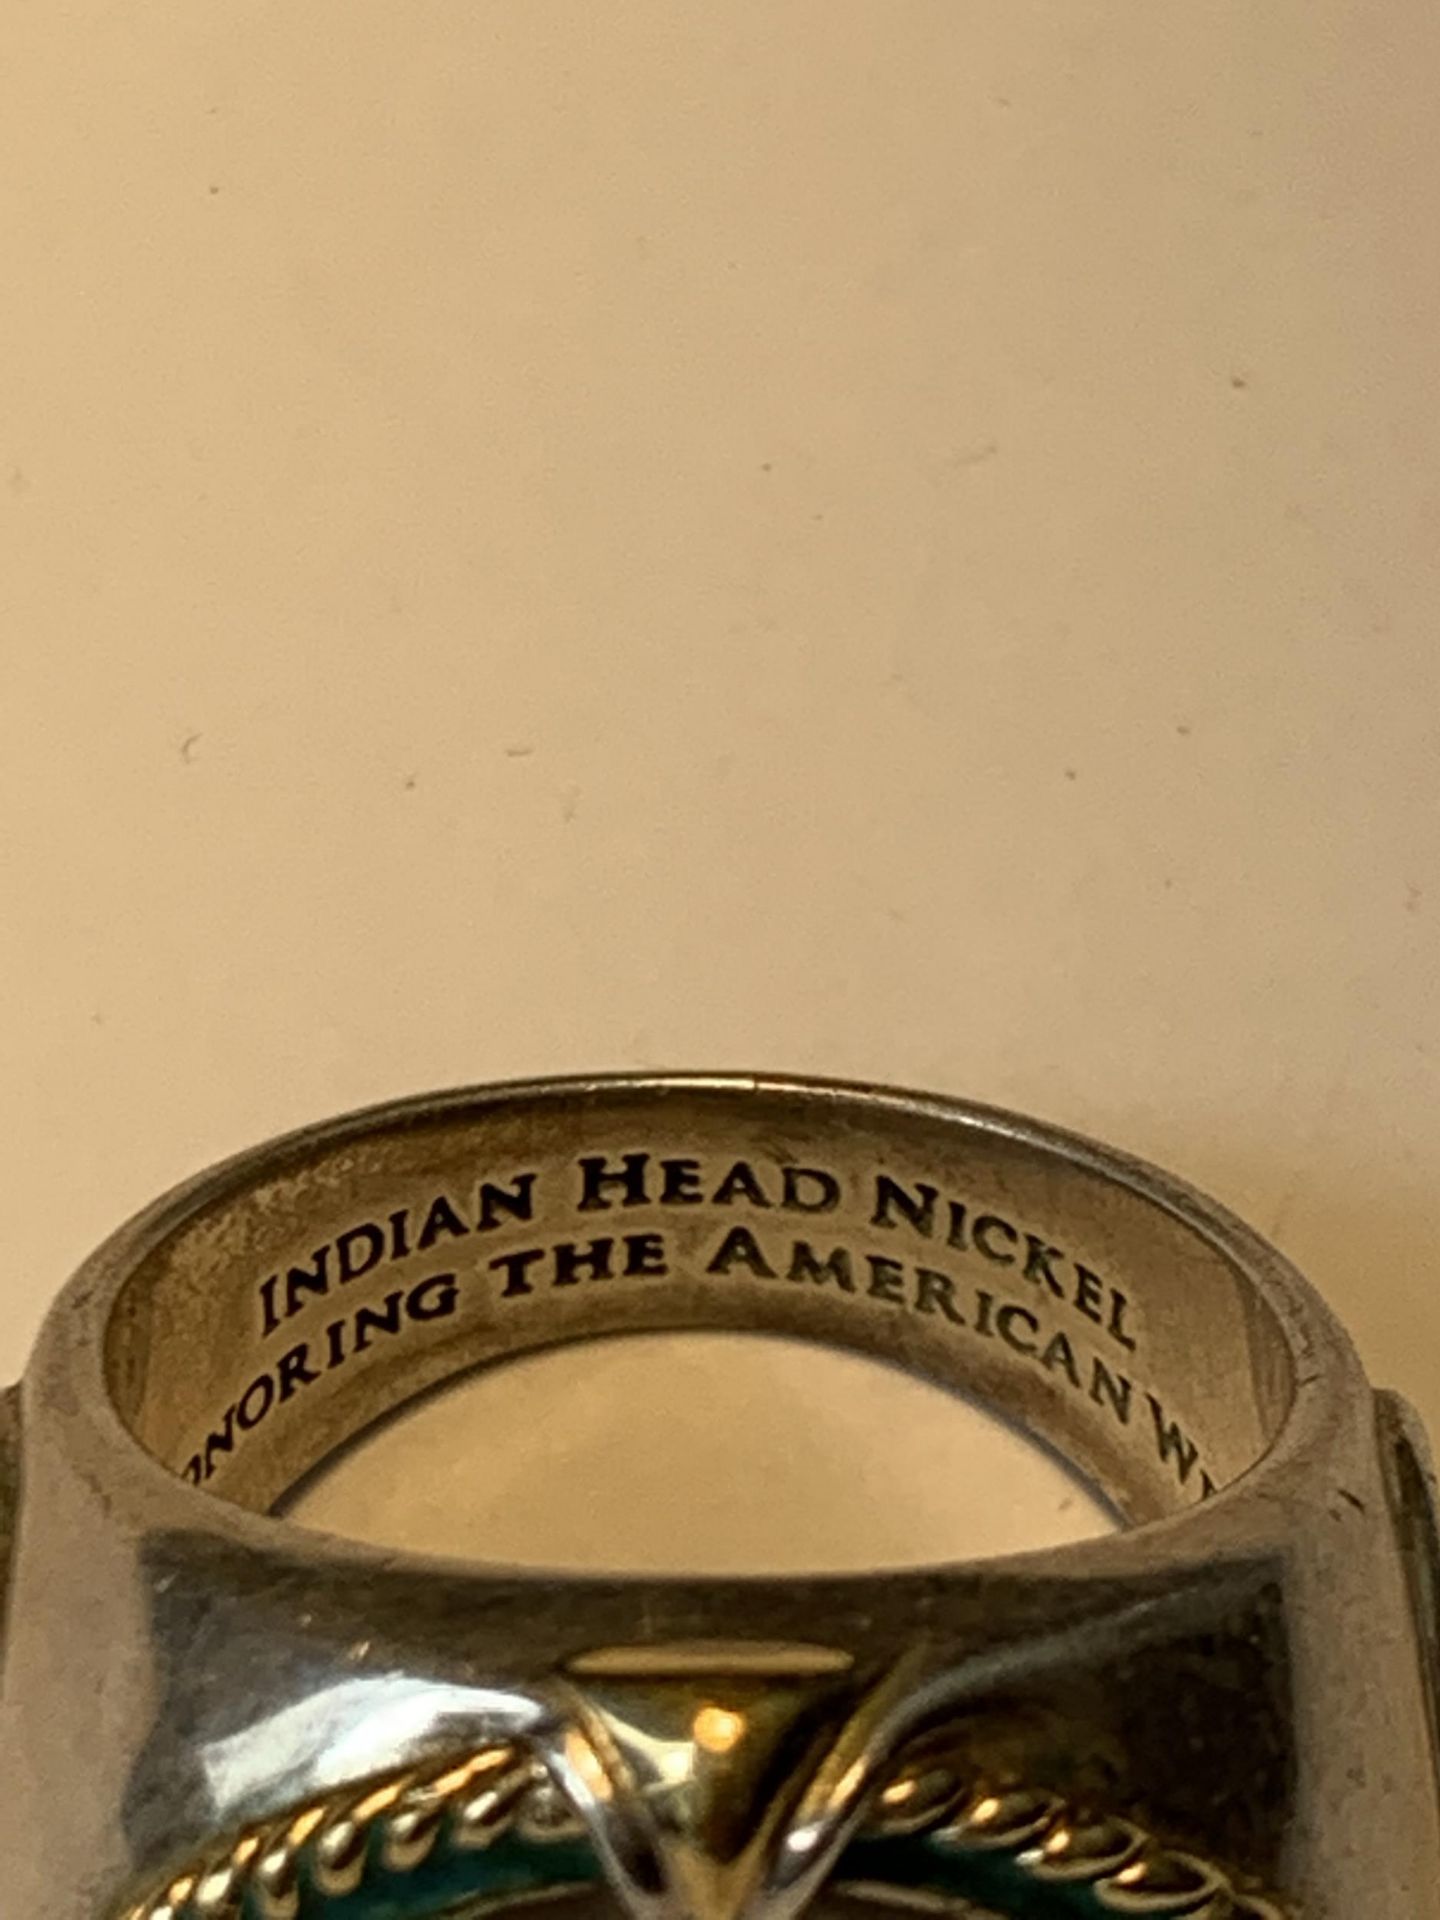 A LARGE RING WITH A FIVE CENT COIN ENGRAVED 'INDIAN HEAD NICKEL HONOURING THE AMERICAN WEST' - Image 3 of 4